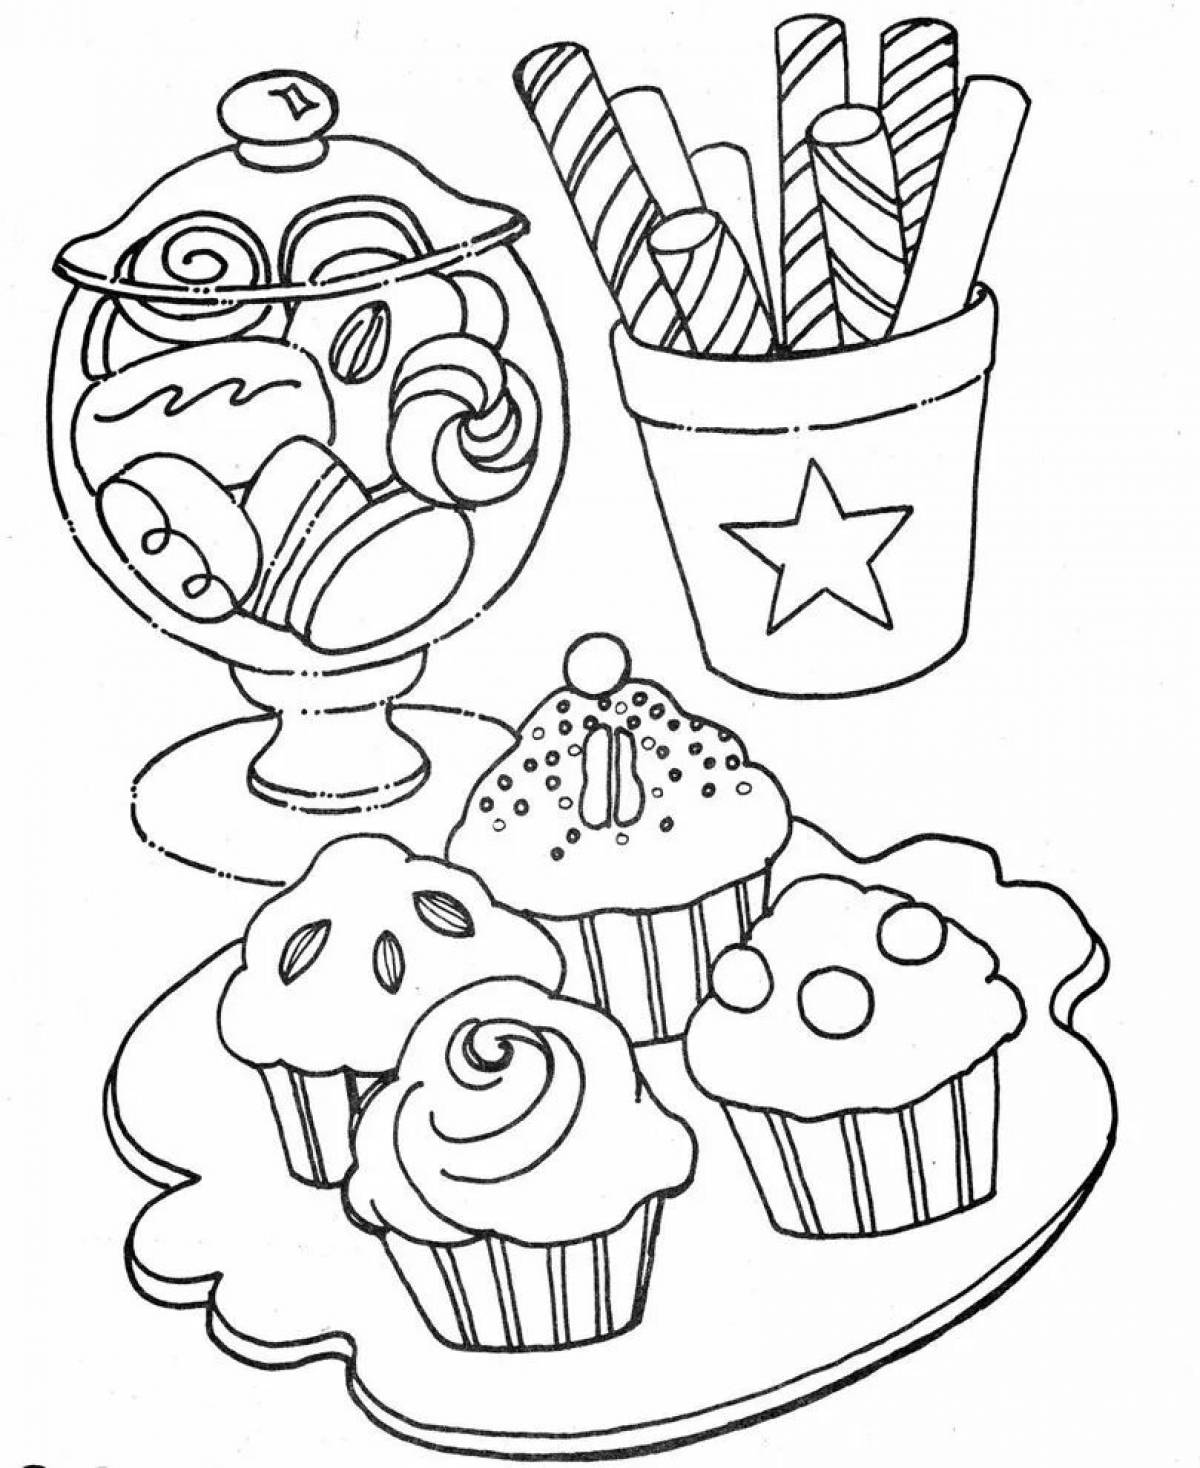 Attractive sweets coloring pages